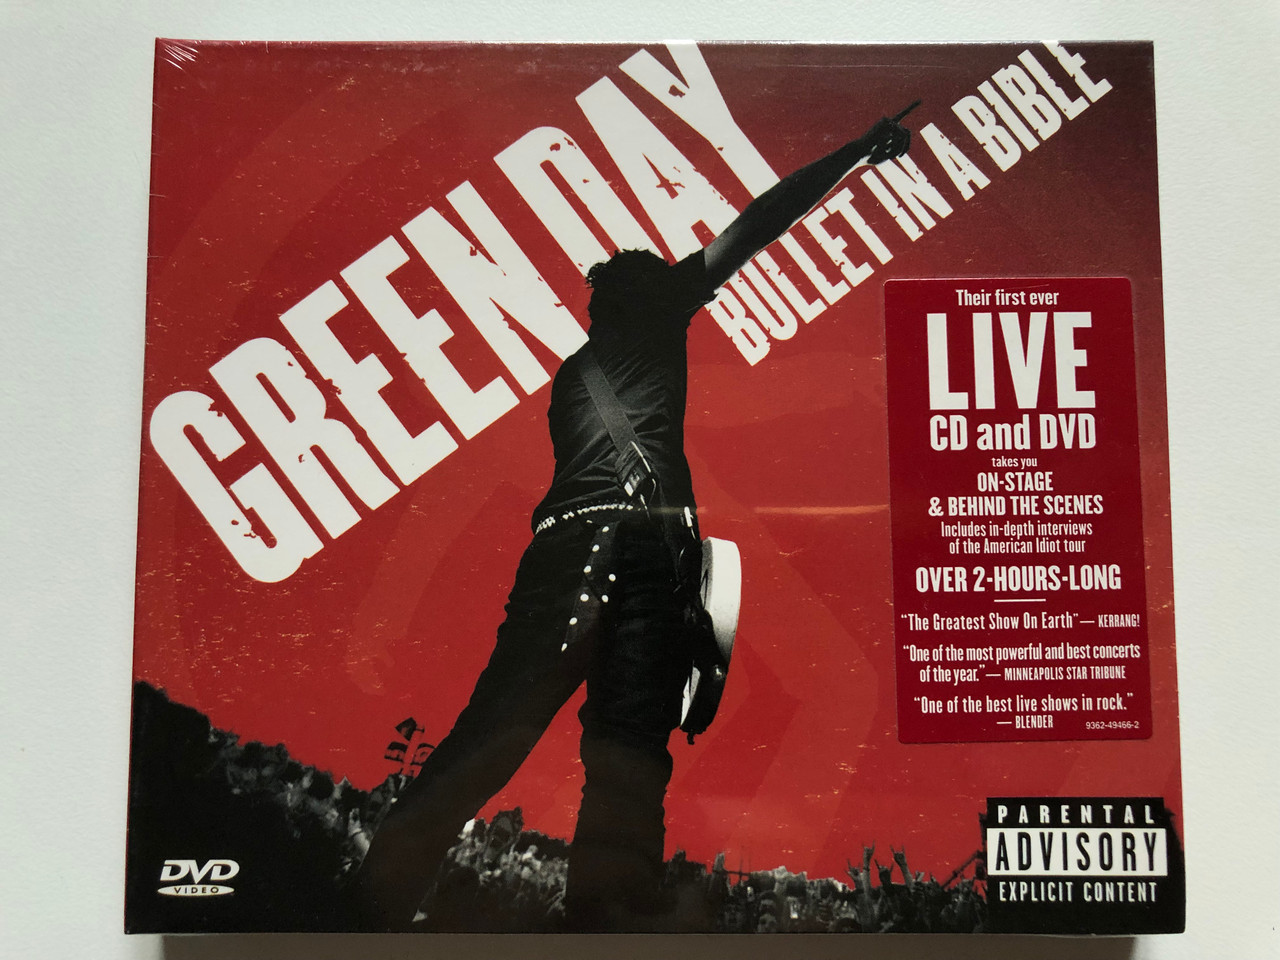 https://cdn10.bigcommerce.com/s-62bdpkt7pb/products/0/images/256071/Green_Day_Bullet_In_A_Bible_Their_first_ever_Live_CD_and_DVD_takes_you_on-stage_behind_the_scenes_includes_in-depth_interviews_of_the_American_Idiot_tour_Reprise_Records_Audio_CD_DVD_1__29902.1665593686.1280.1280.JPG?c=2&_gl=1*cli8dr*_ga*MjA2NTIxMjE2MC4xNTkwNTEyNTMy*_ga_WS2VZYPC6G*MTY2NTU4NTUzOC41OTAuMS4xNjY1NTkzNDIyLjU4LjAuMA..